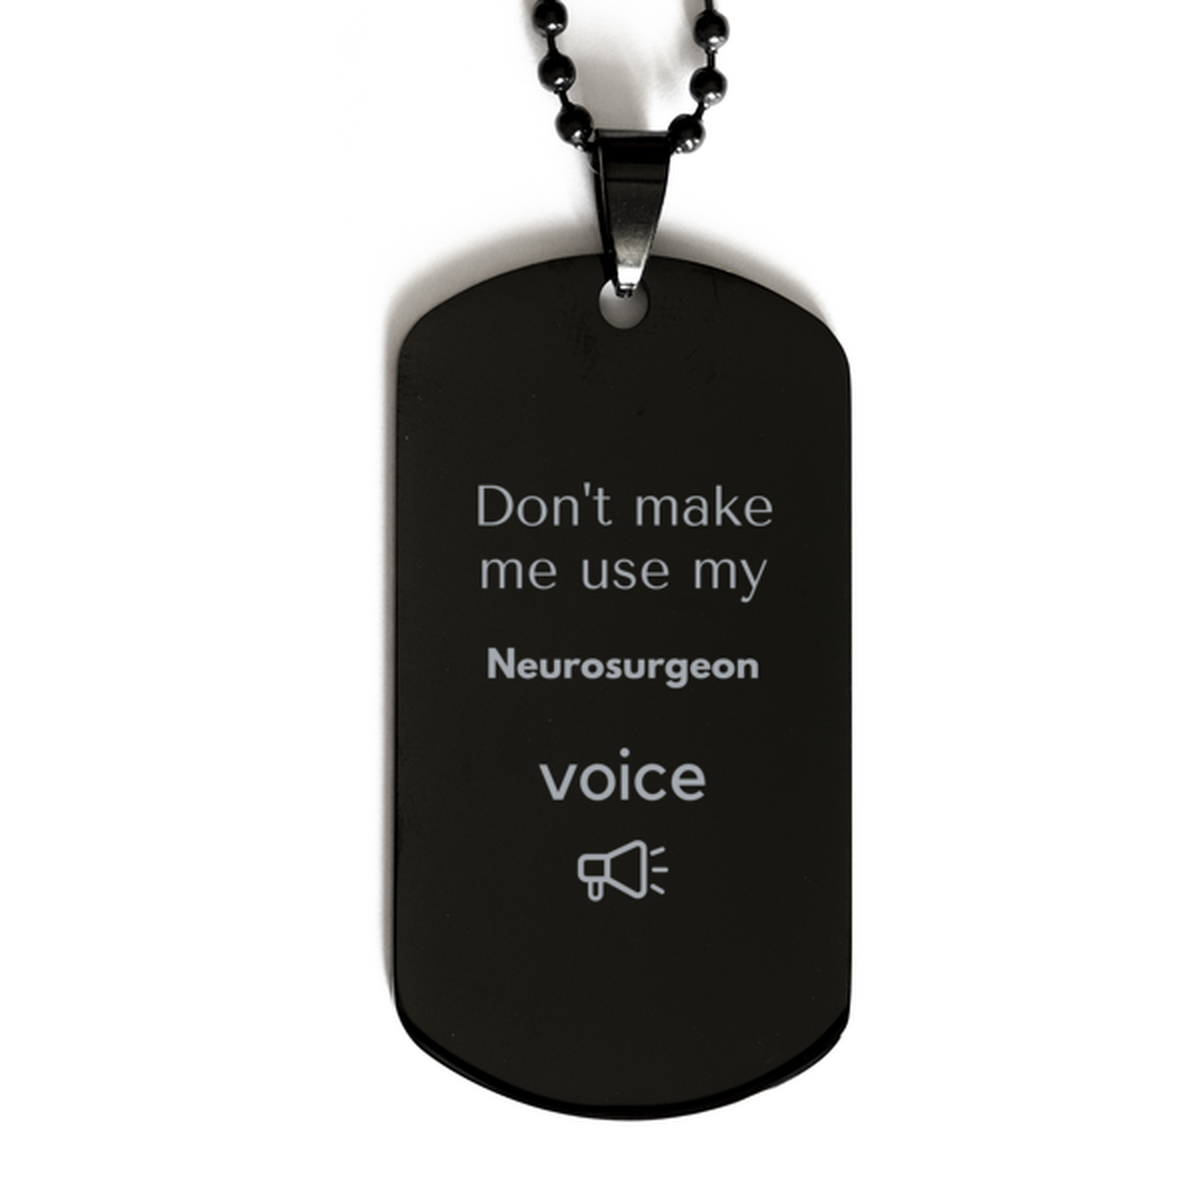 Don't make me use my Neurosurgeon voice, Sarcasm Neurosurgeon Gifts, Christmas Neurosurgeon Black Dog Tag Birthday Unique Gifts For Neurosurgeon Coworkers, Men, Women, Colleague, Friends